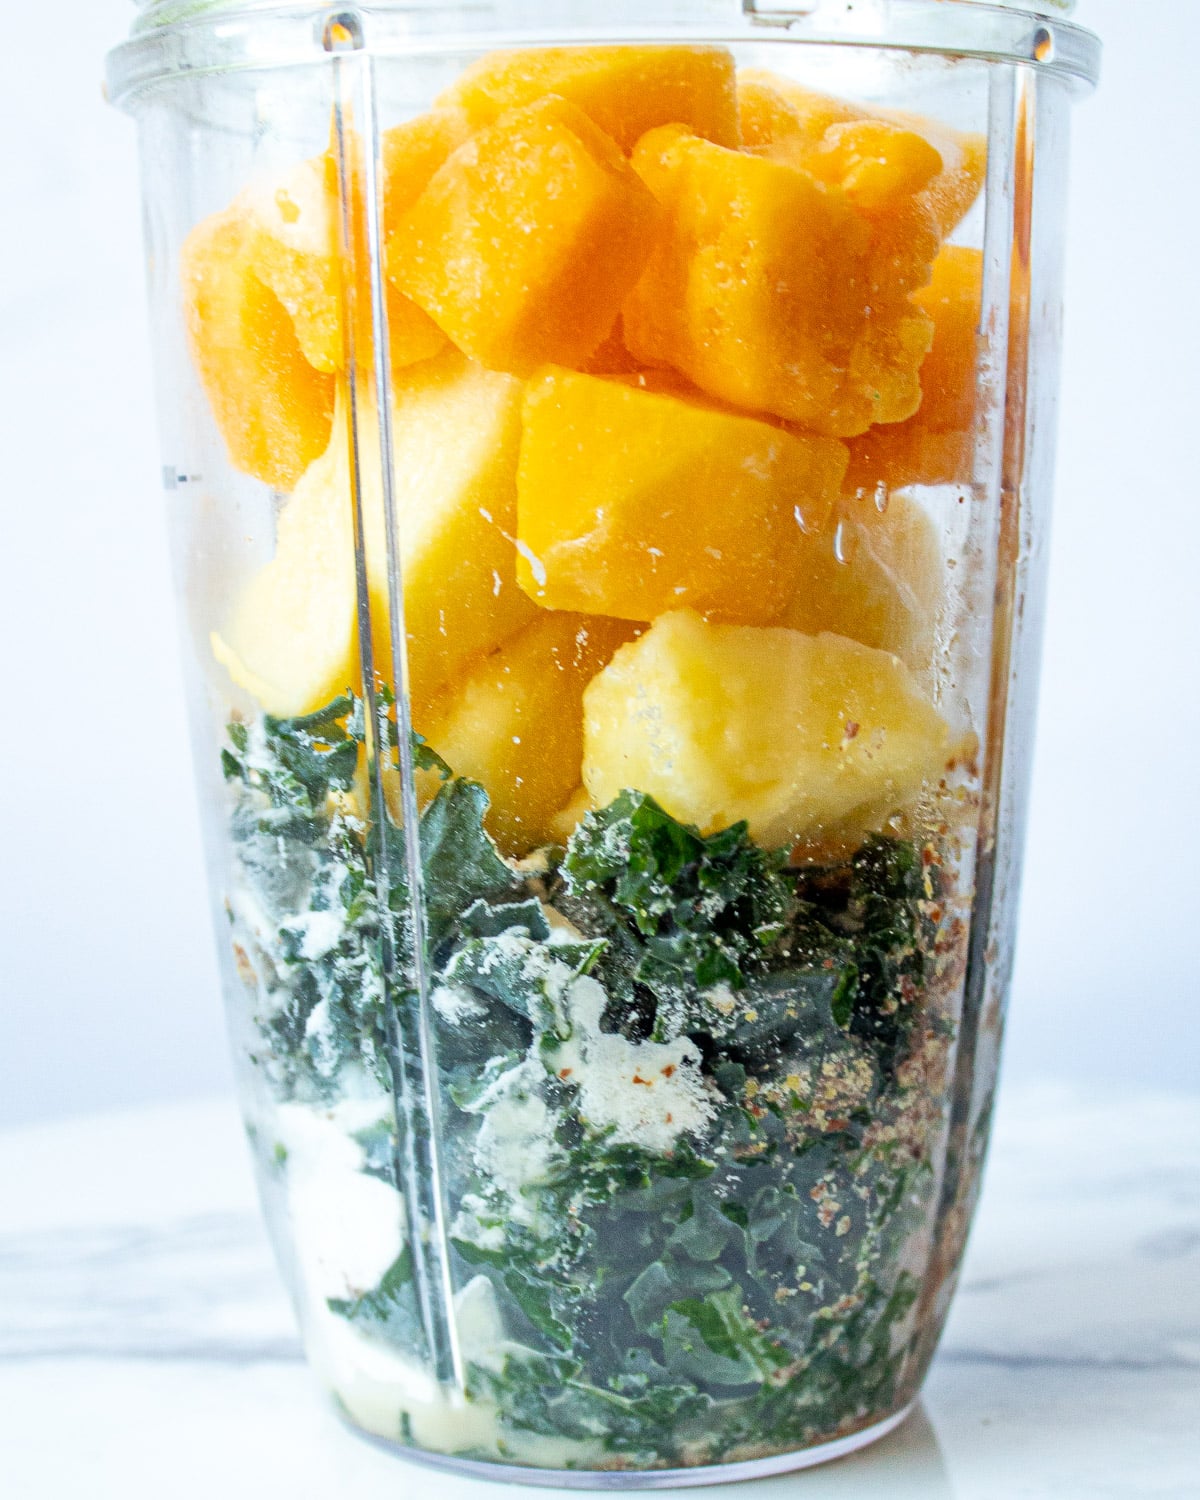 mango kale smoothie in a blender cup